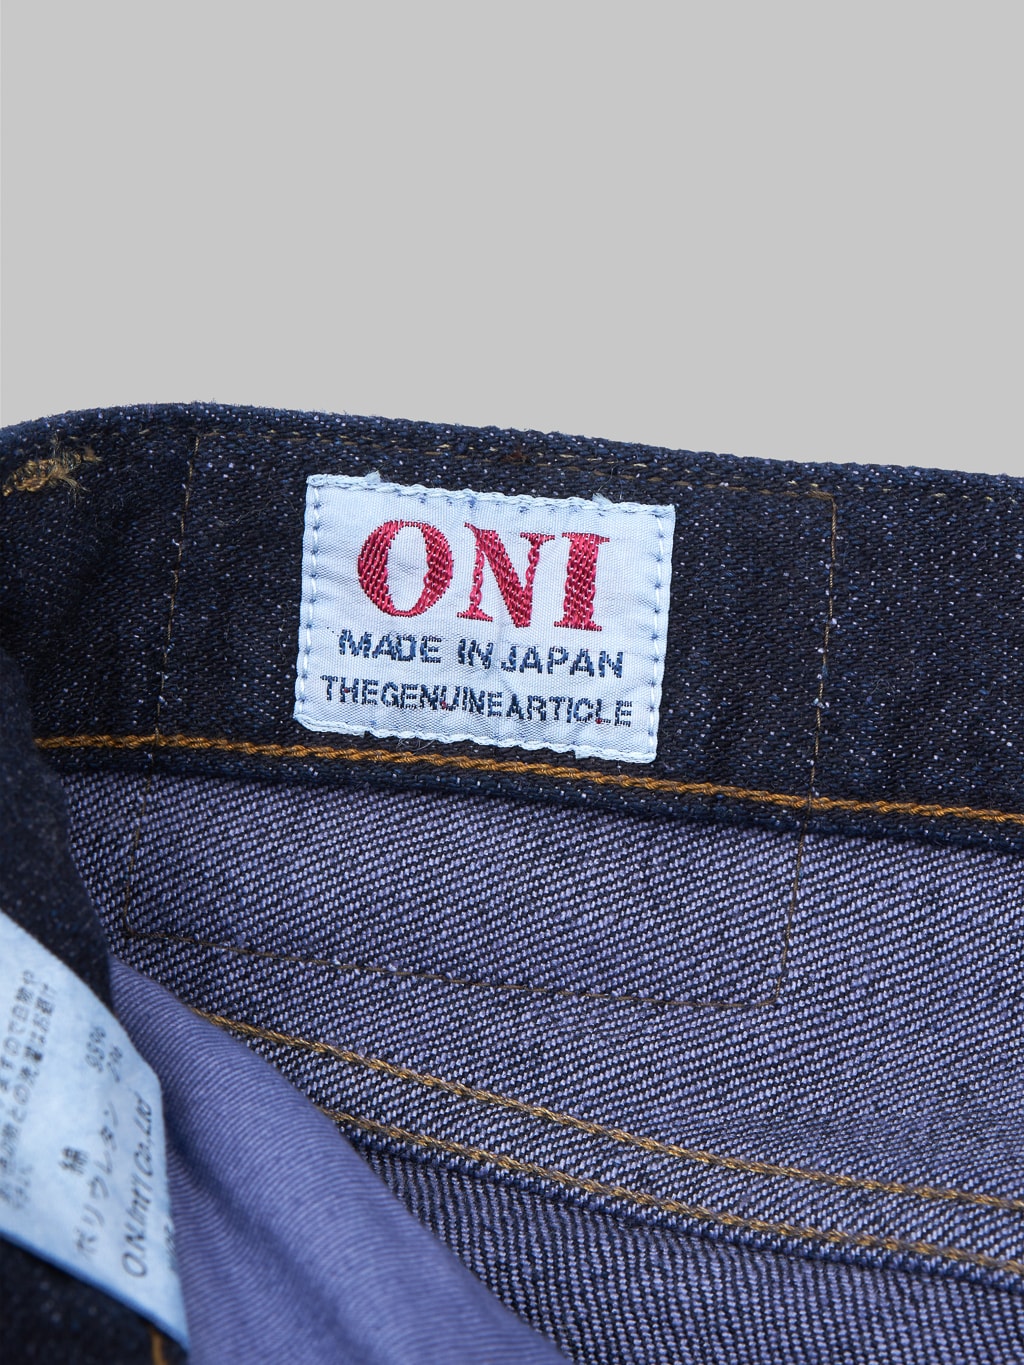 ONI Denim 122S Violet Weft 15oz Stretch Relax Tapered Jeans interior tag